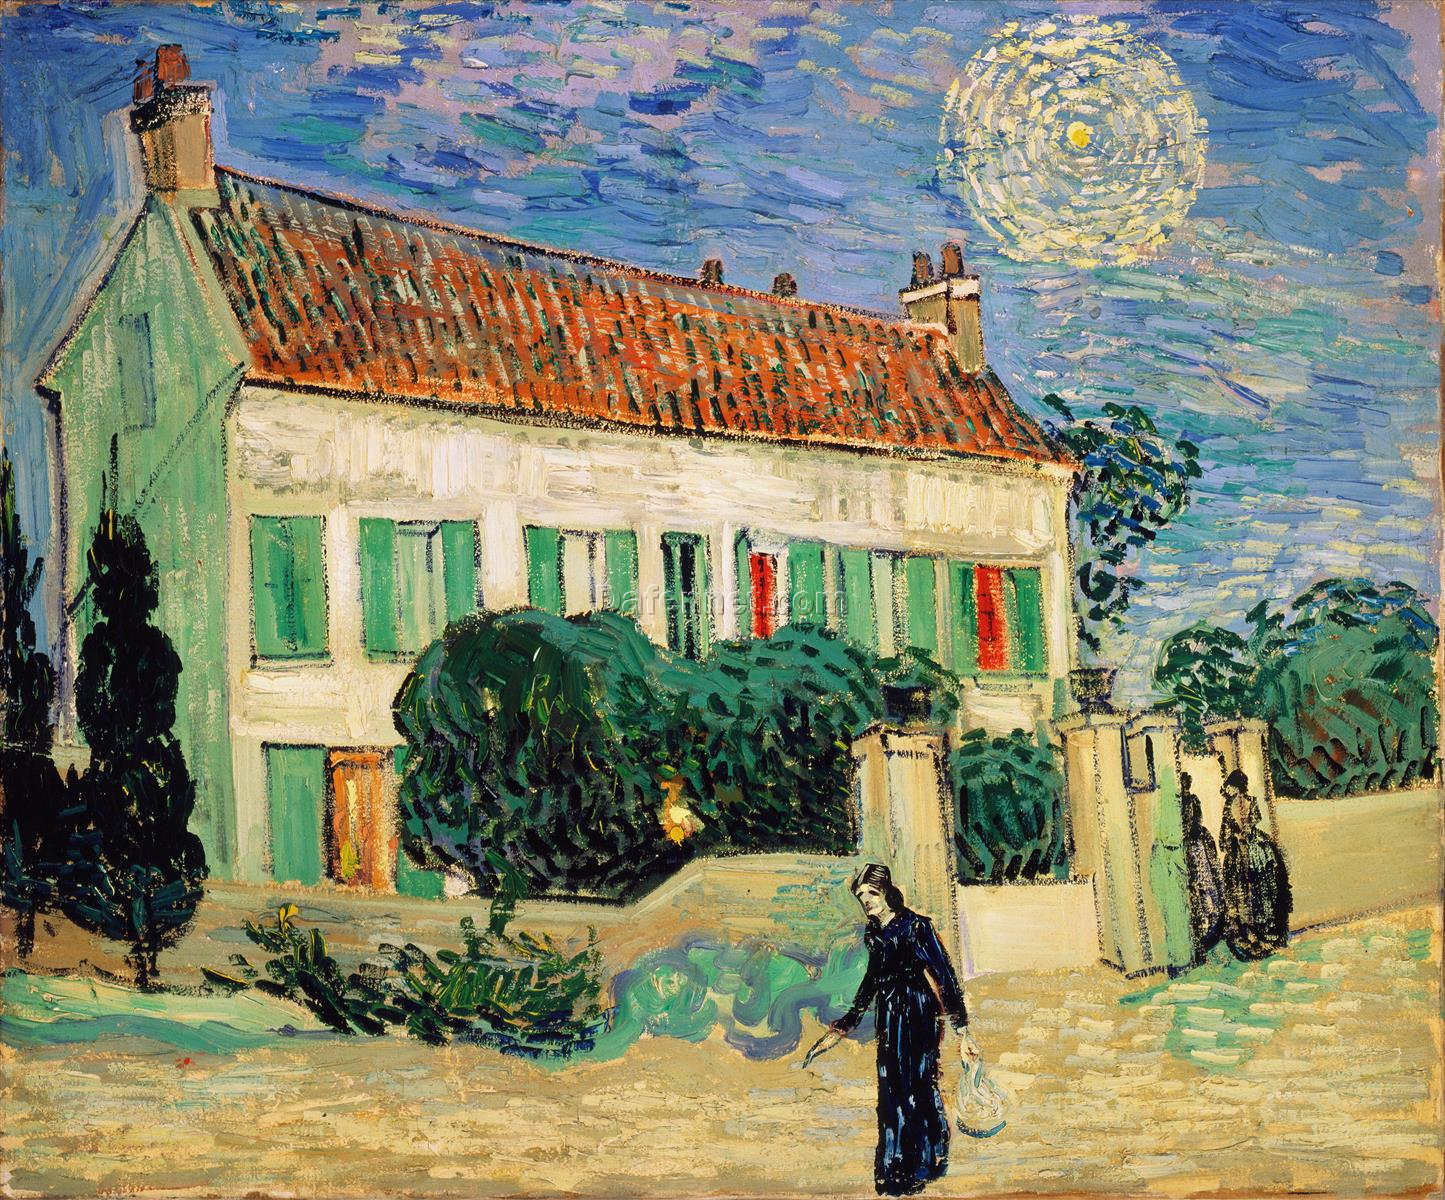 White House at Night -Vincent van Gogh-oil painting reproduction